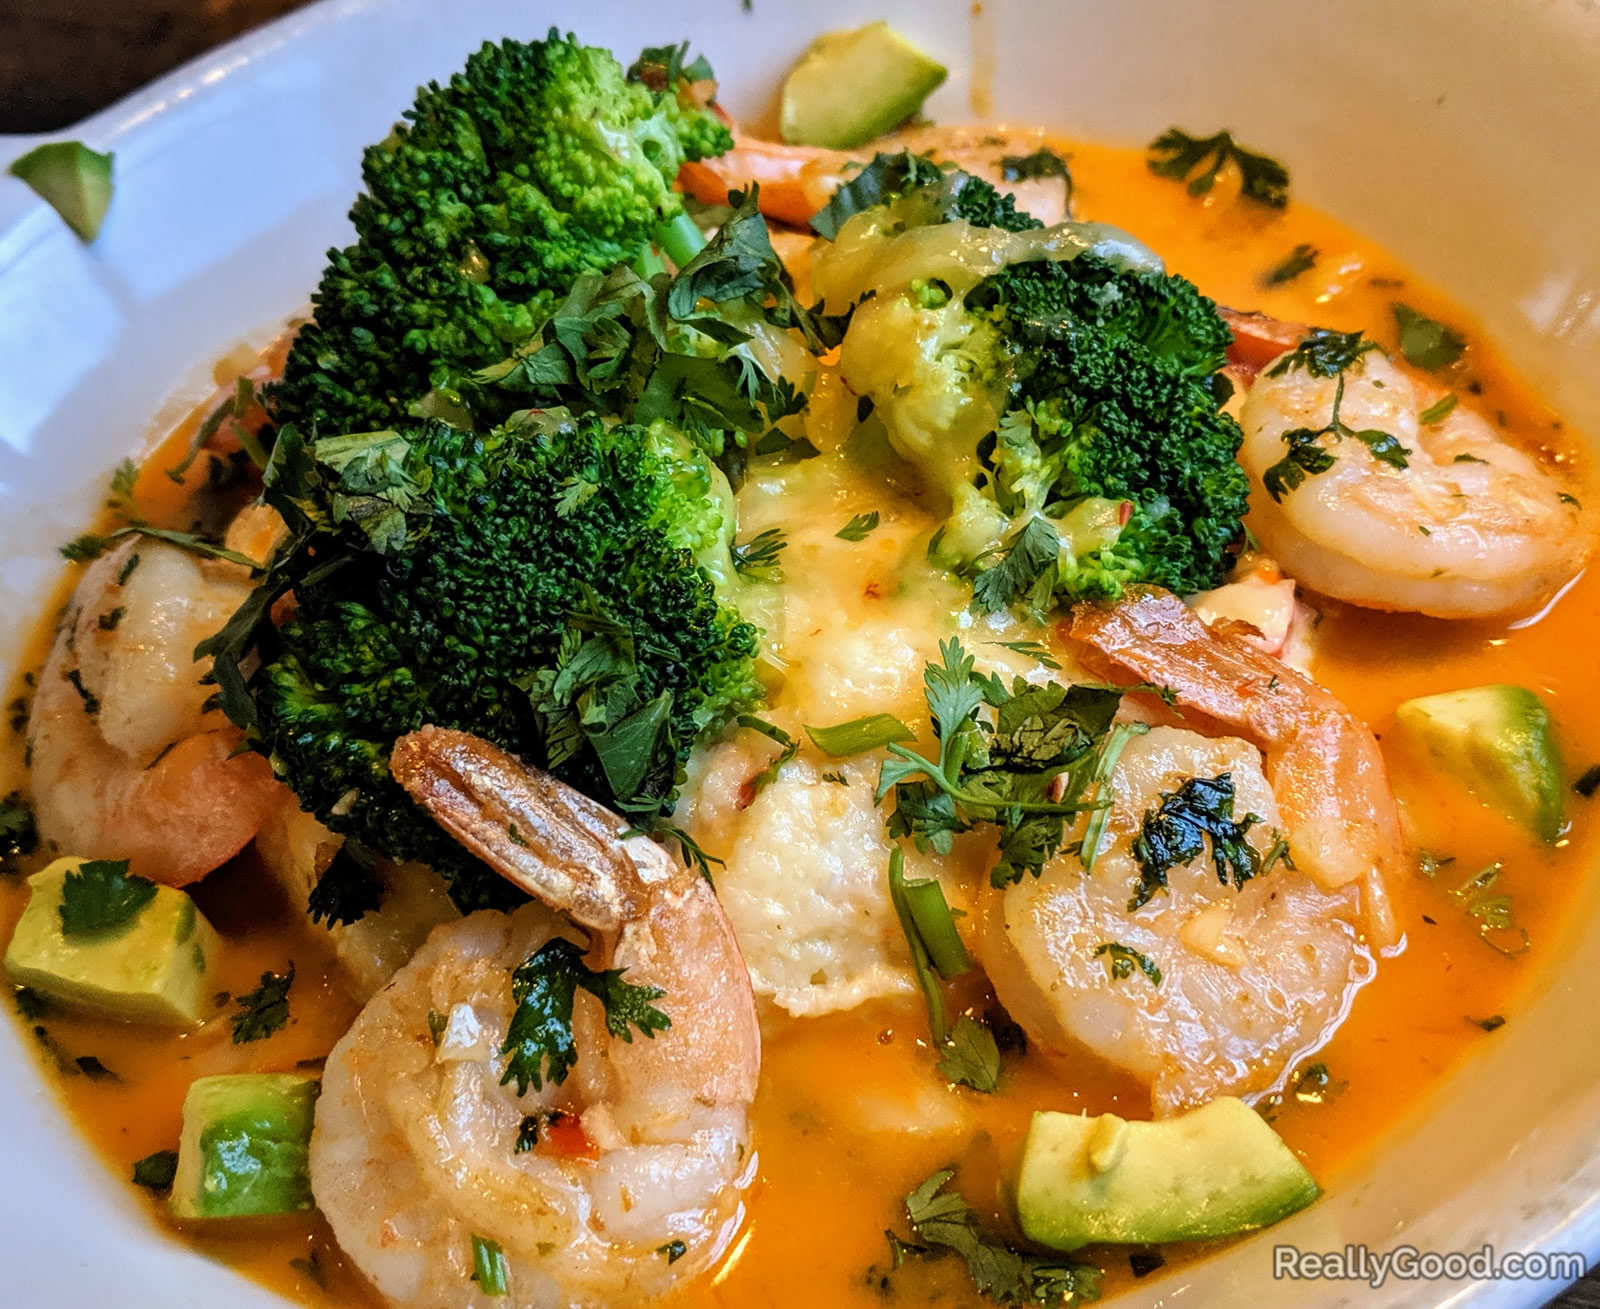 Shrimp and cheesy grits